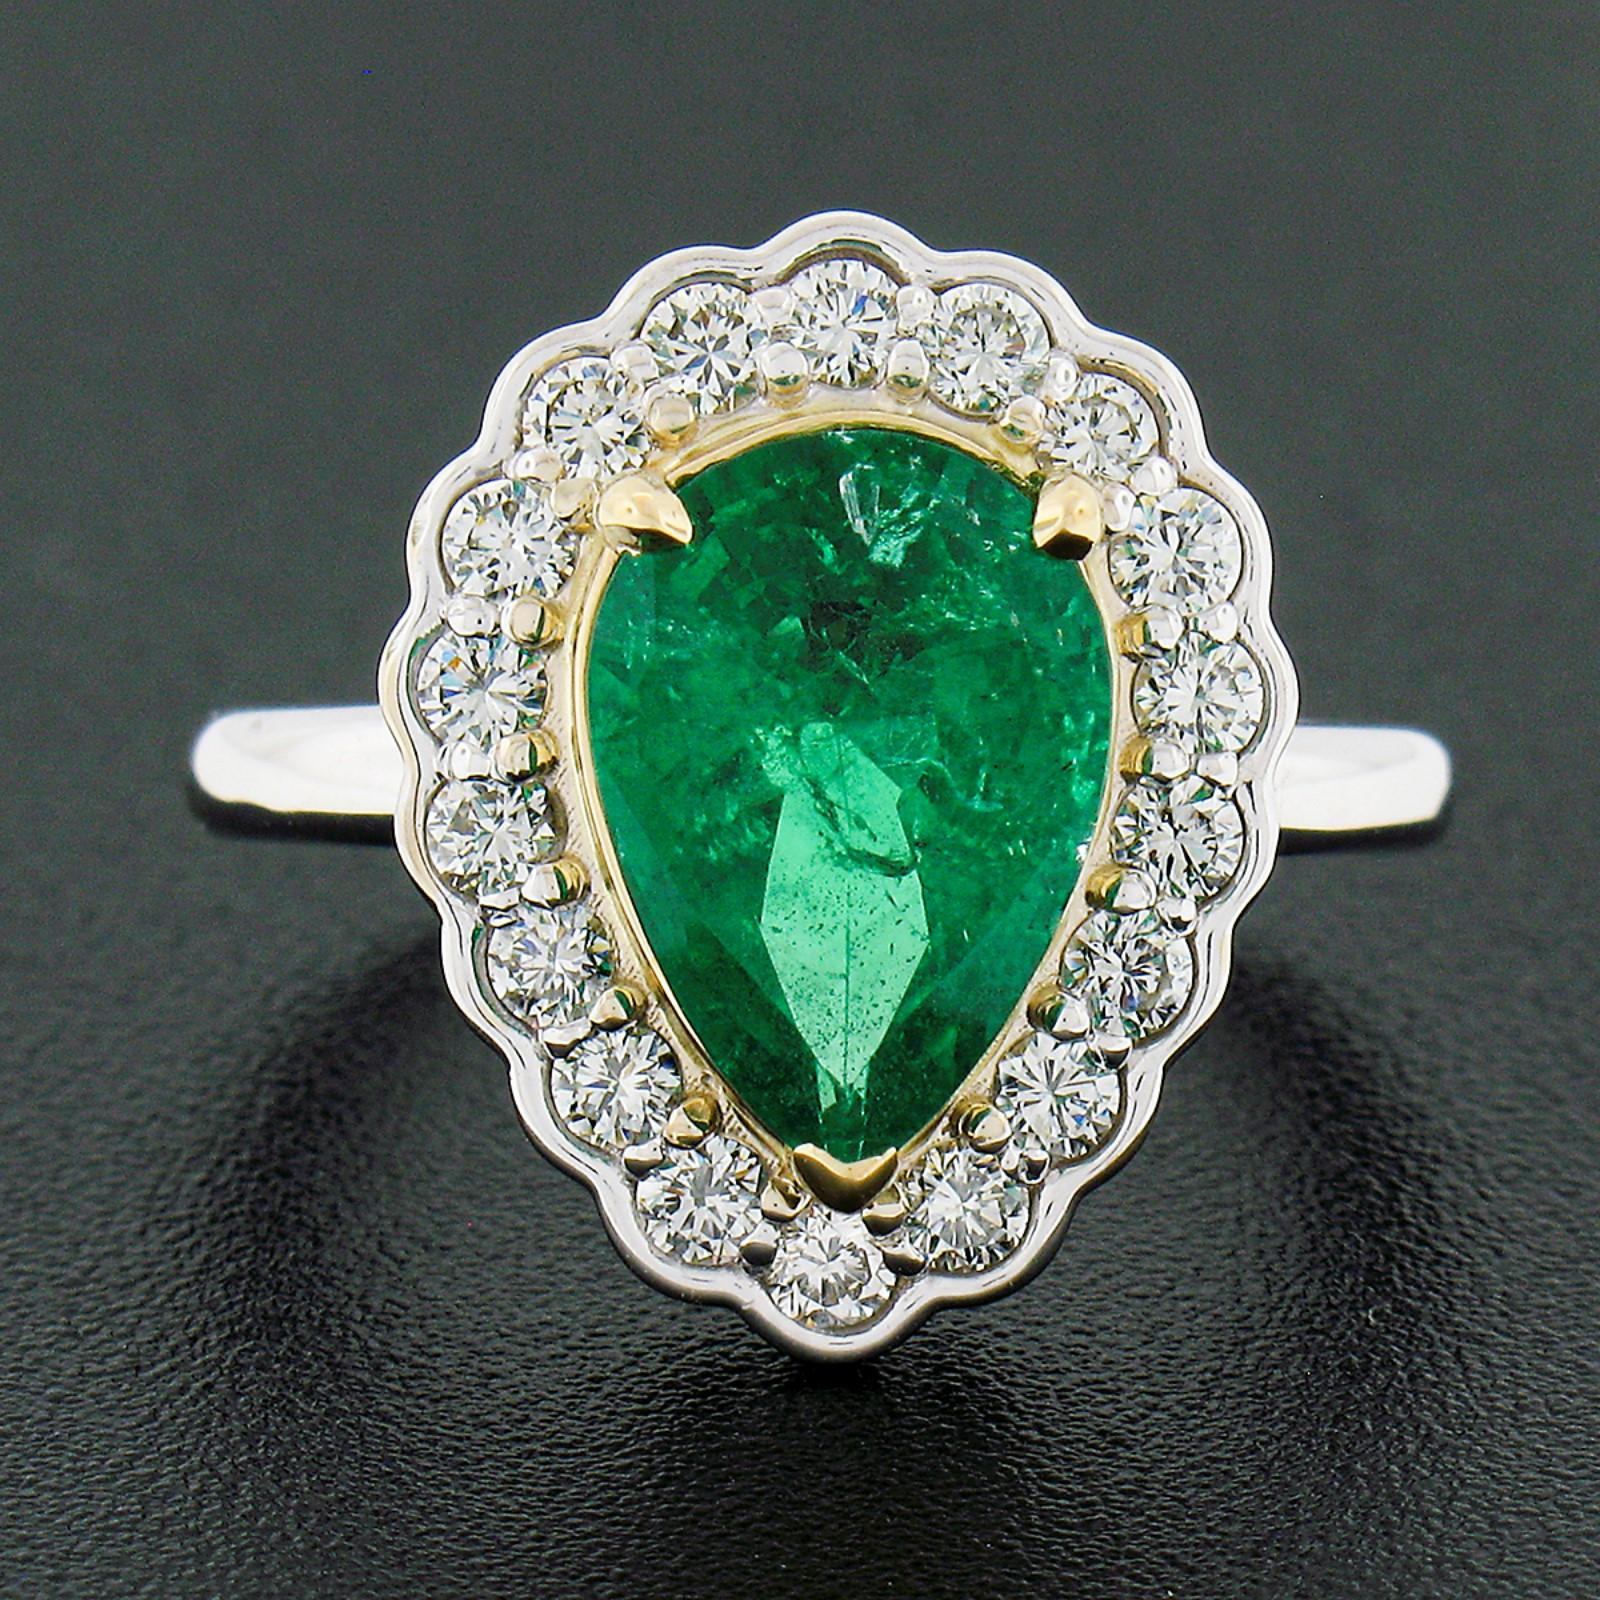 This absolutely magnificent emerald and diamond custom made ring is newly crafted in solid 18k white gold and features an incredible 3.19 carat pear cut emerald neatly prong set at its center in a solid 18k yellow gold basket. This natural emerald